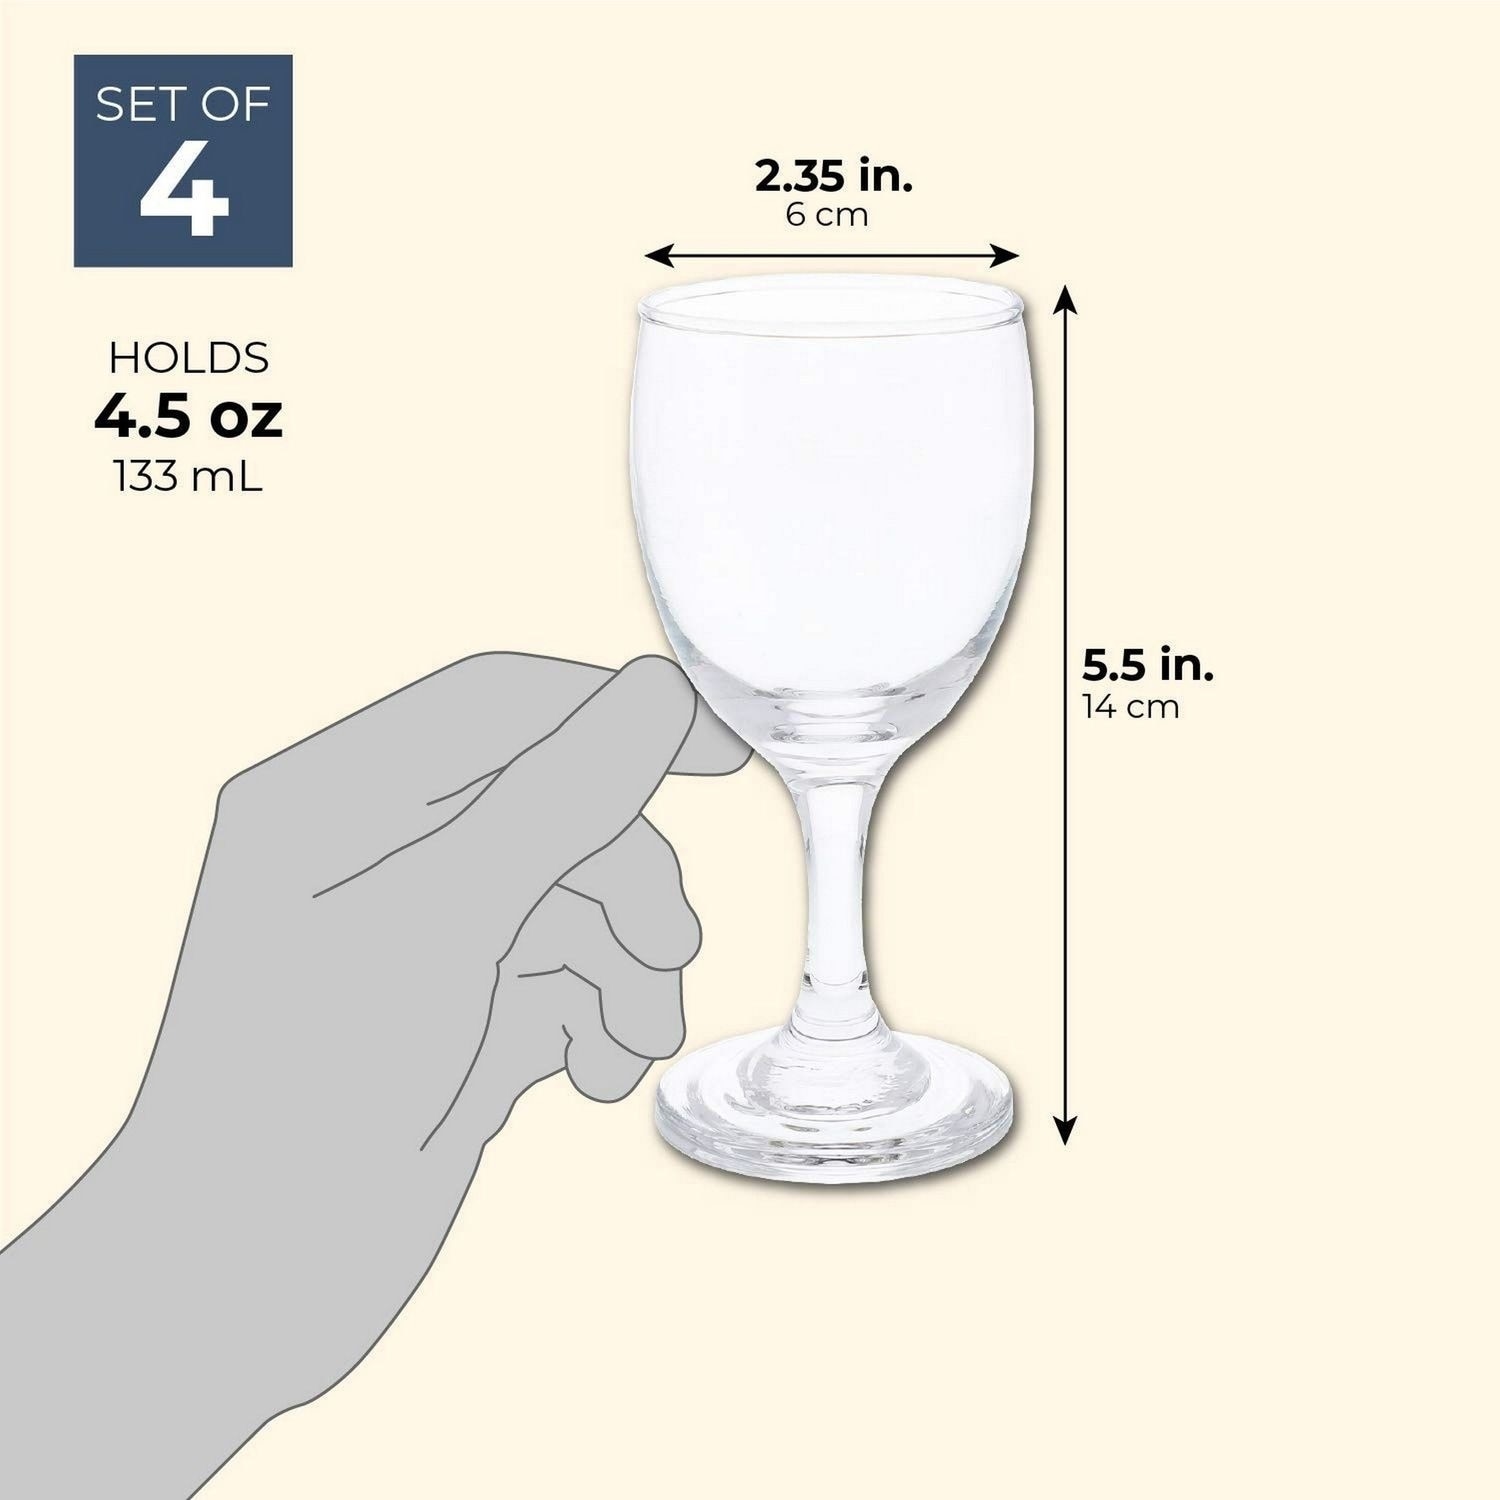 https://ak1.ostkcdn.com/images/products/30100835/Juvale-Set-of-4-Small-Clear-Glass-Stemmed-Wine-Glasses-4.5-Ounces-b24372c3-be0a-4fd3-a767-9d87dba686cd.jpg